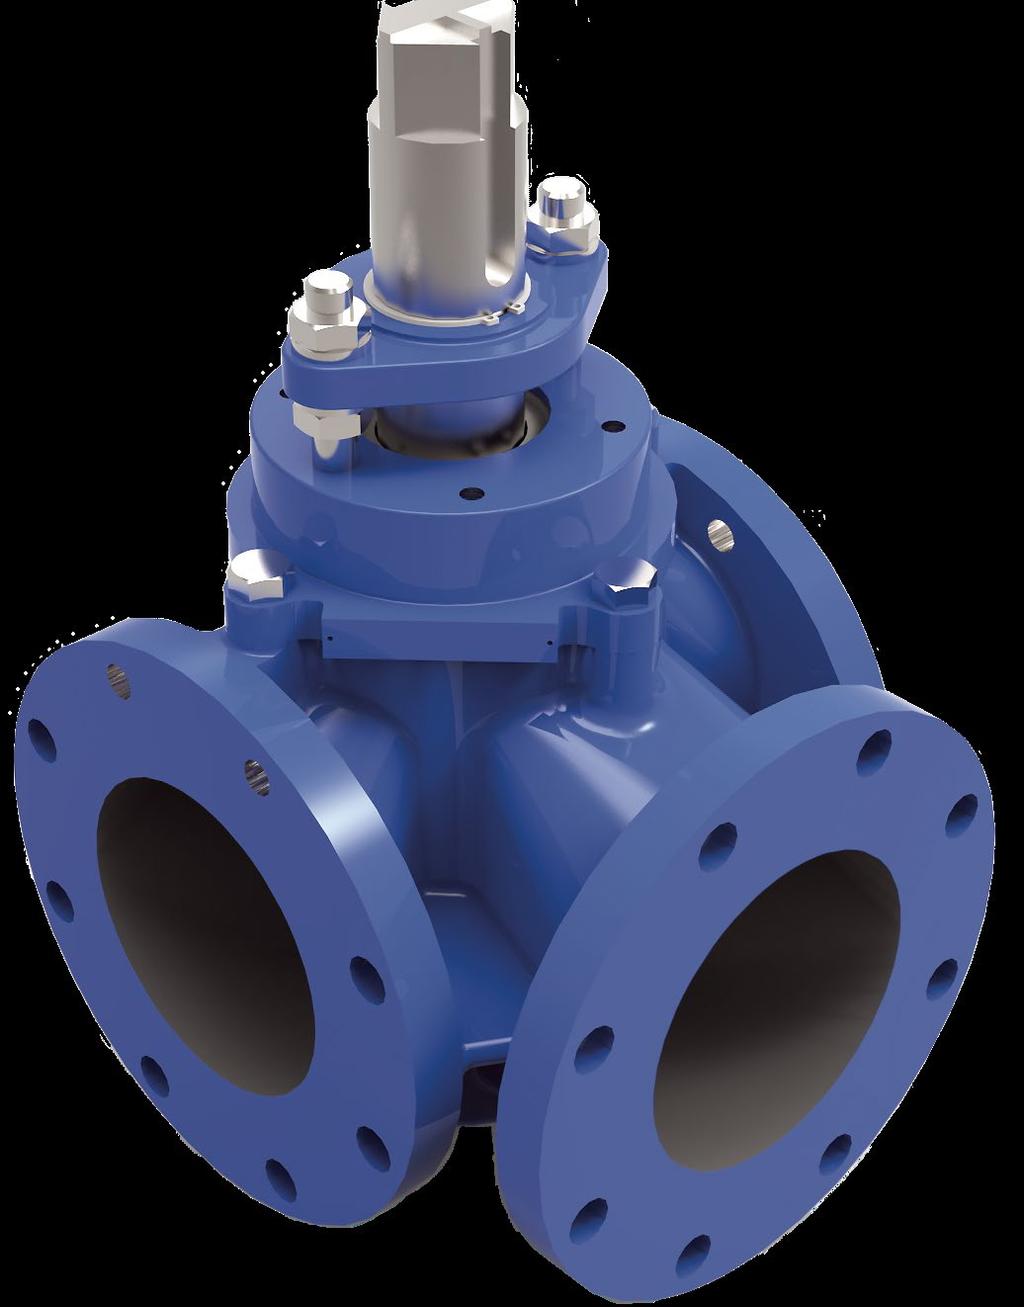 TECHNICAL SPECIFICATION Multi-Port Plug Valves Valves shall be of the Multi-Port non-lubricated concentric type with a totally encapsulated plug.